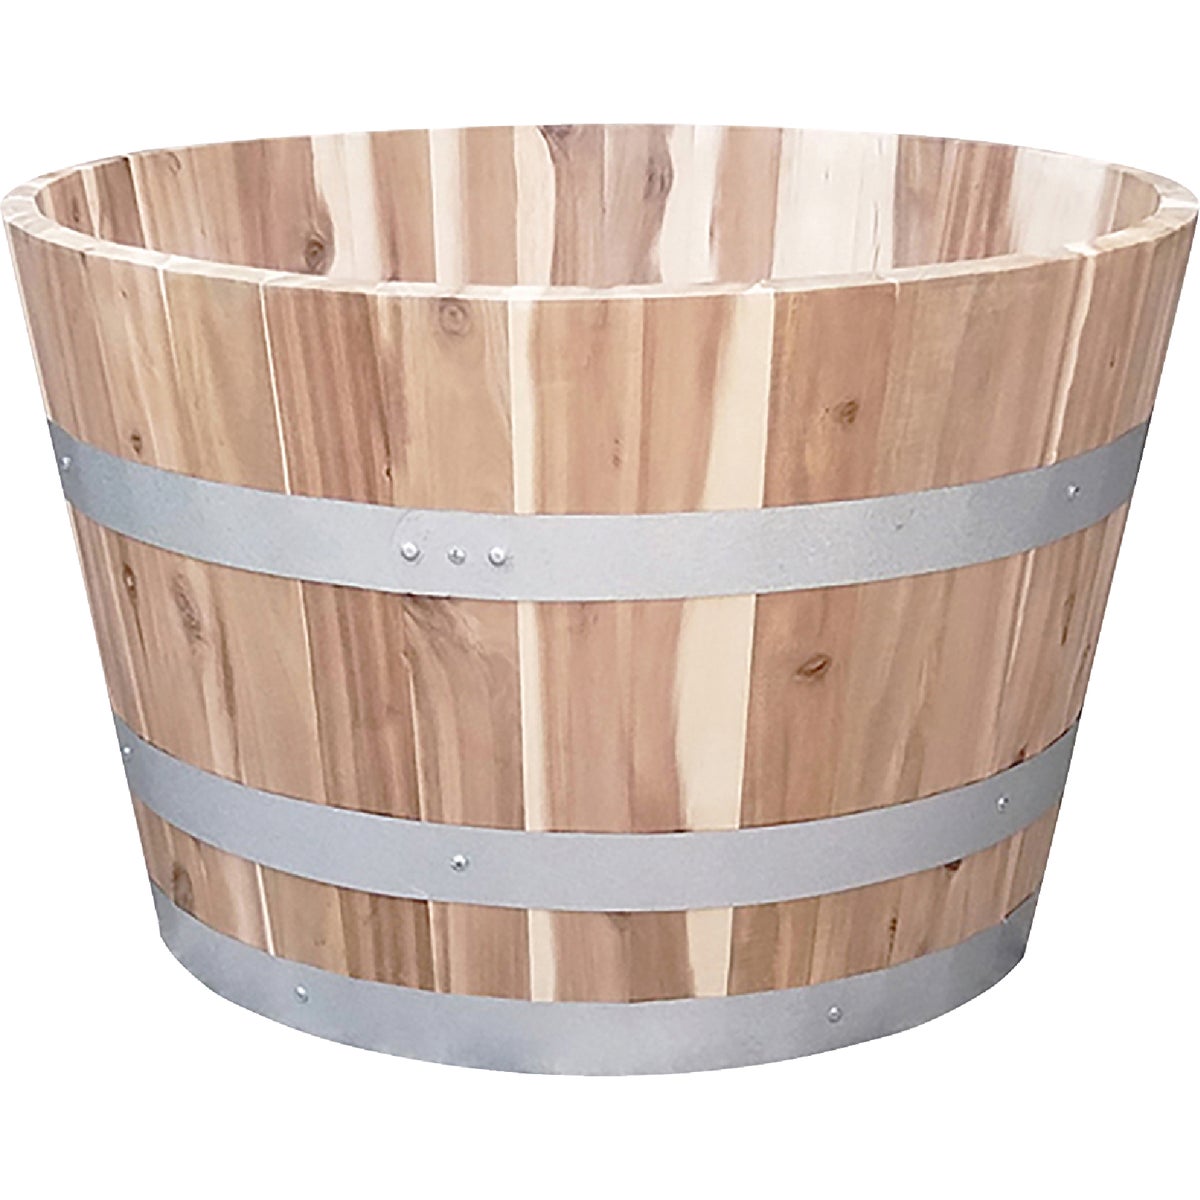 Item 704163, The Real Wood Products Acacia Whiskey Barrel is the perfect planter for any